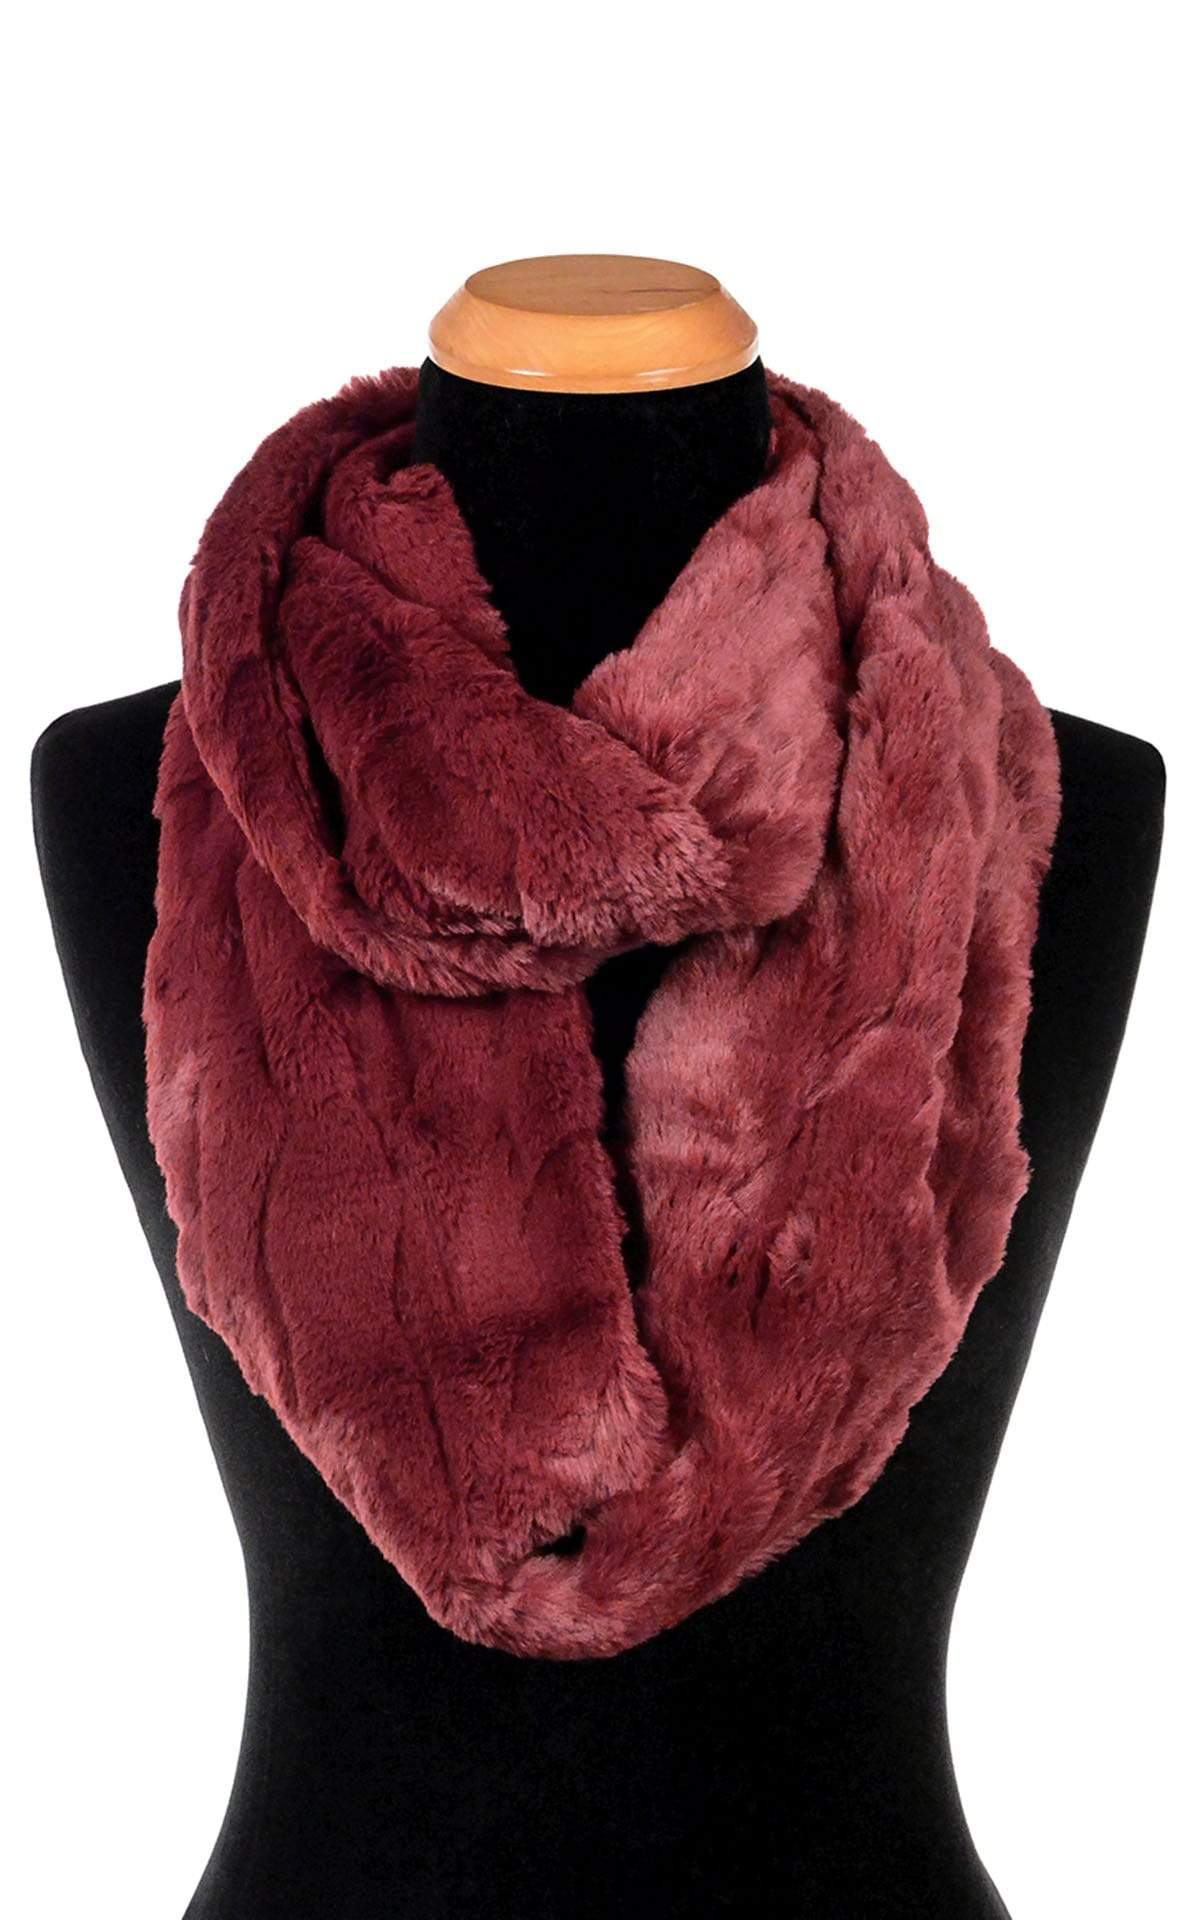 Infinity Scarf - Luxury Faux Fur In Cranberry Creek  (Limited Availability!)